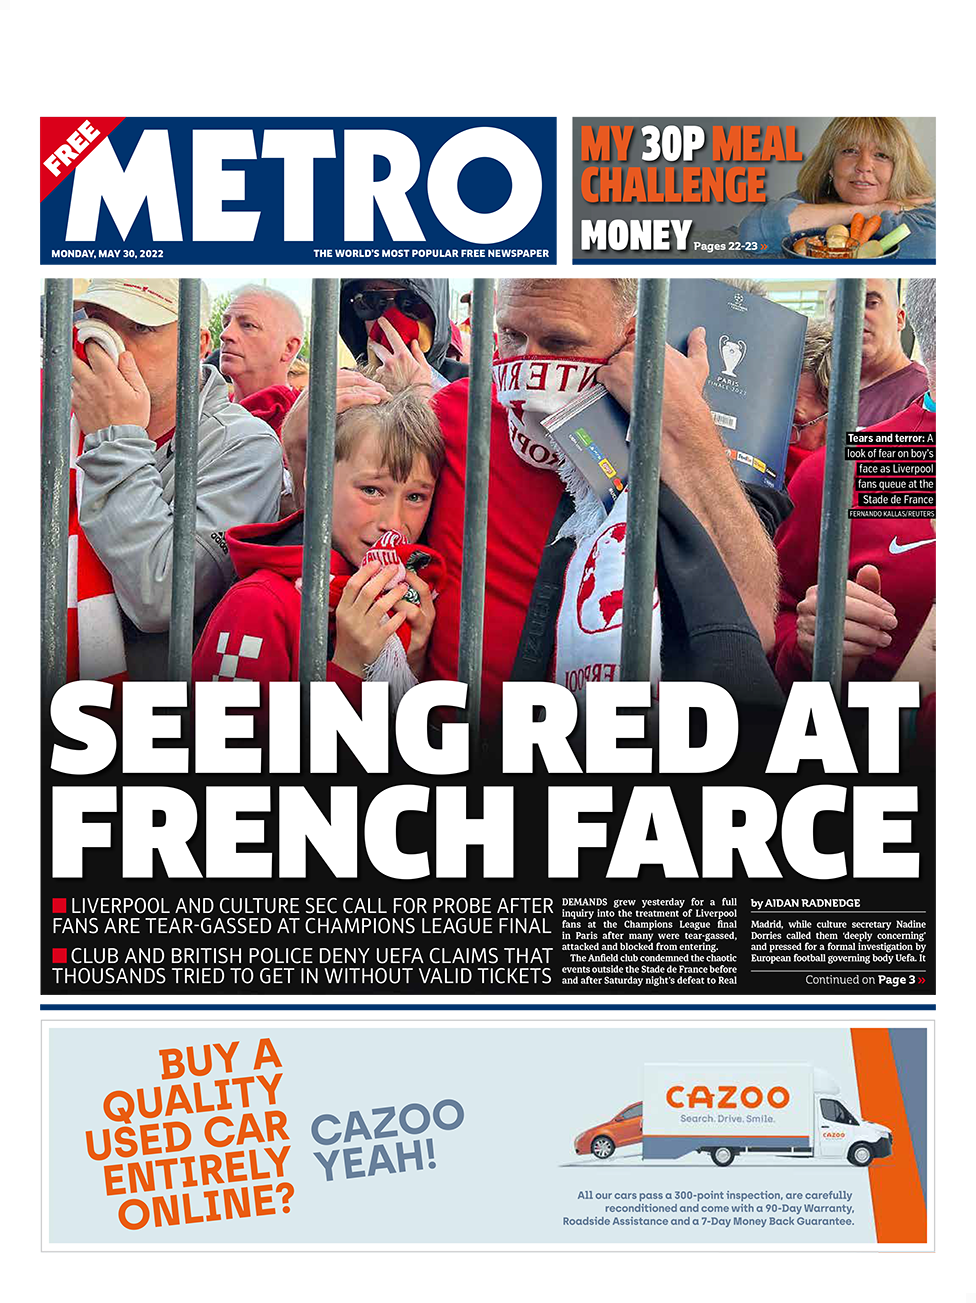 The headline in the Metro reads 'Seeing red at French farce'